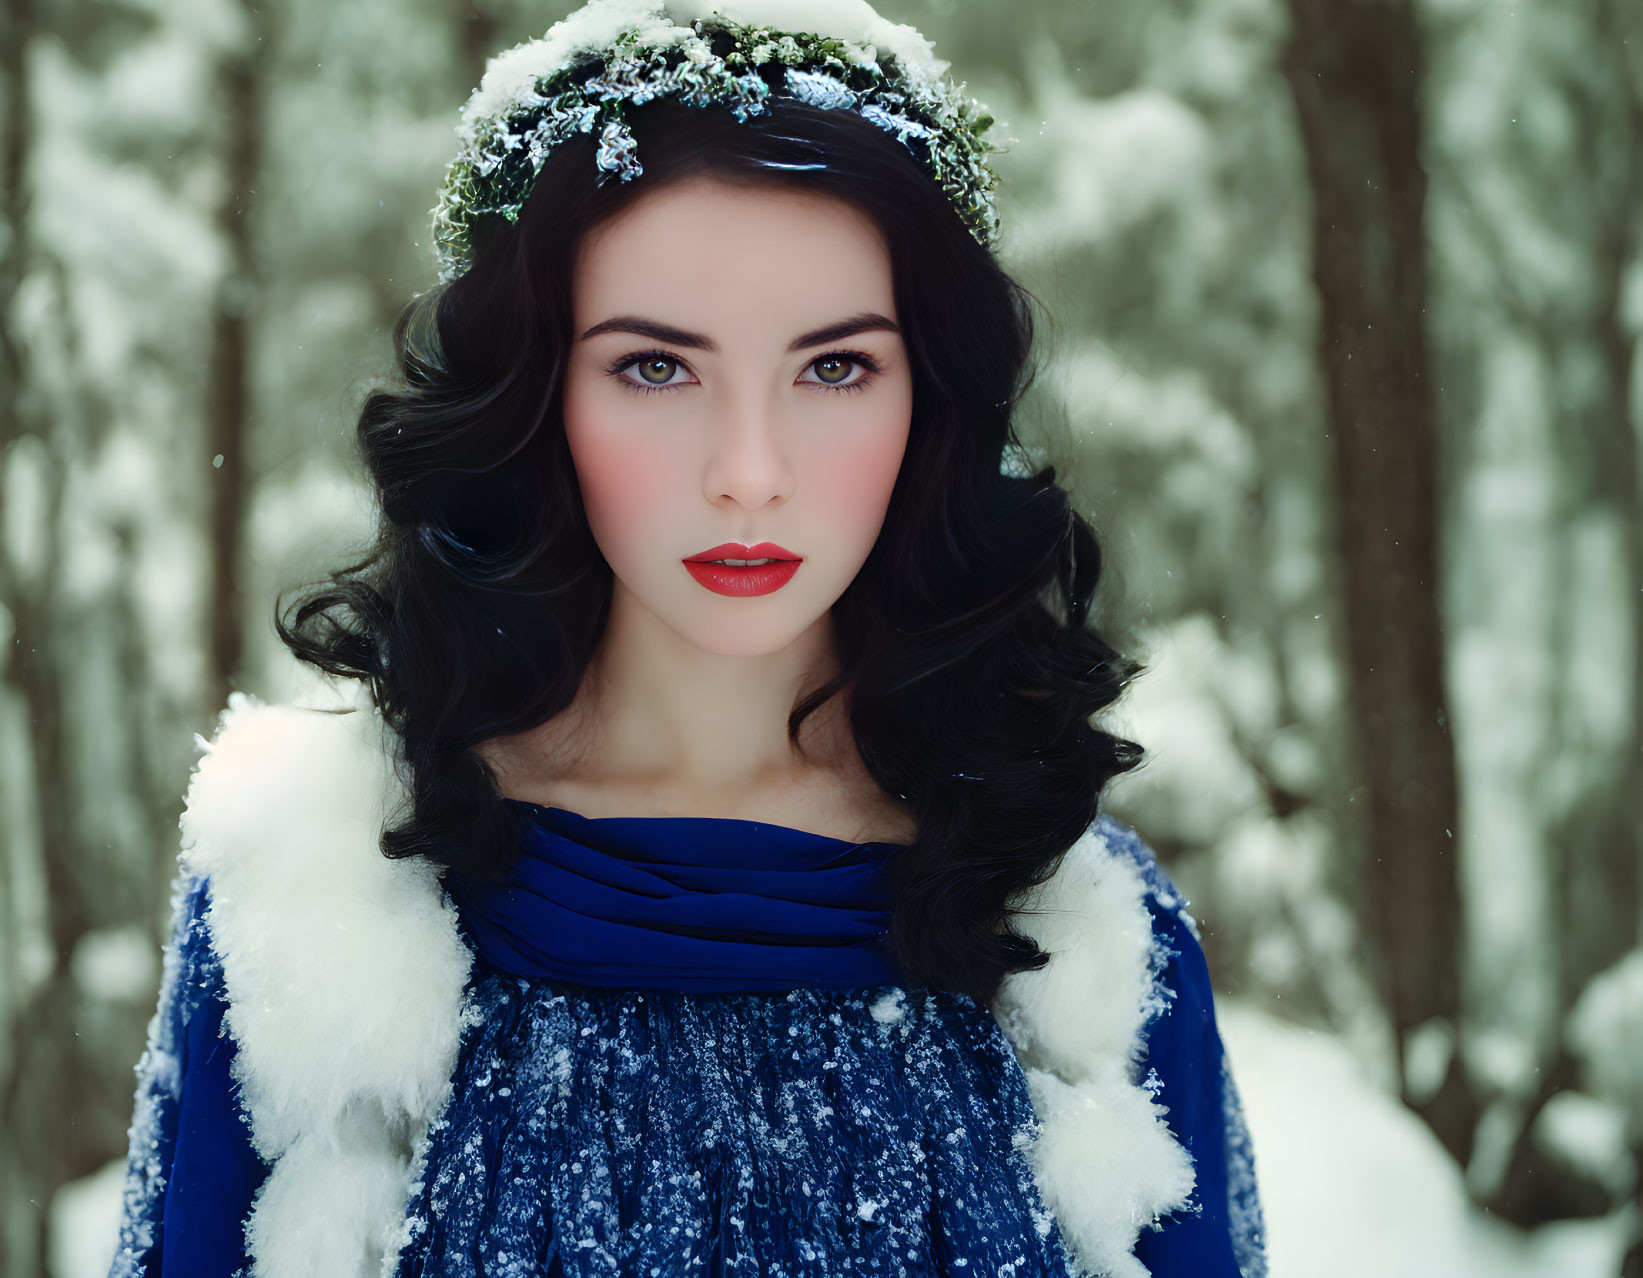 Snow White revisited.